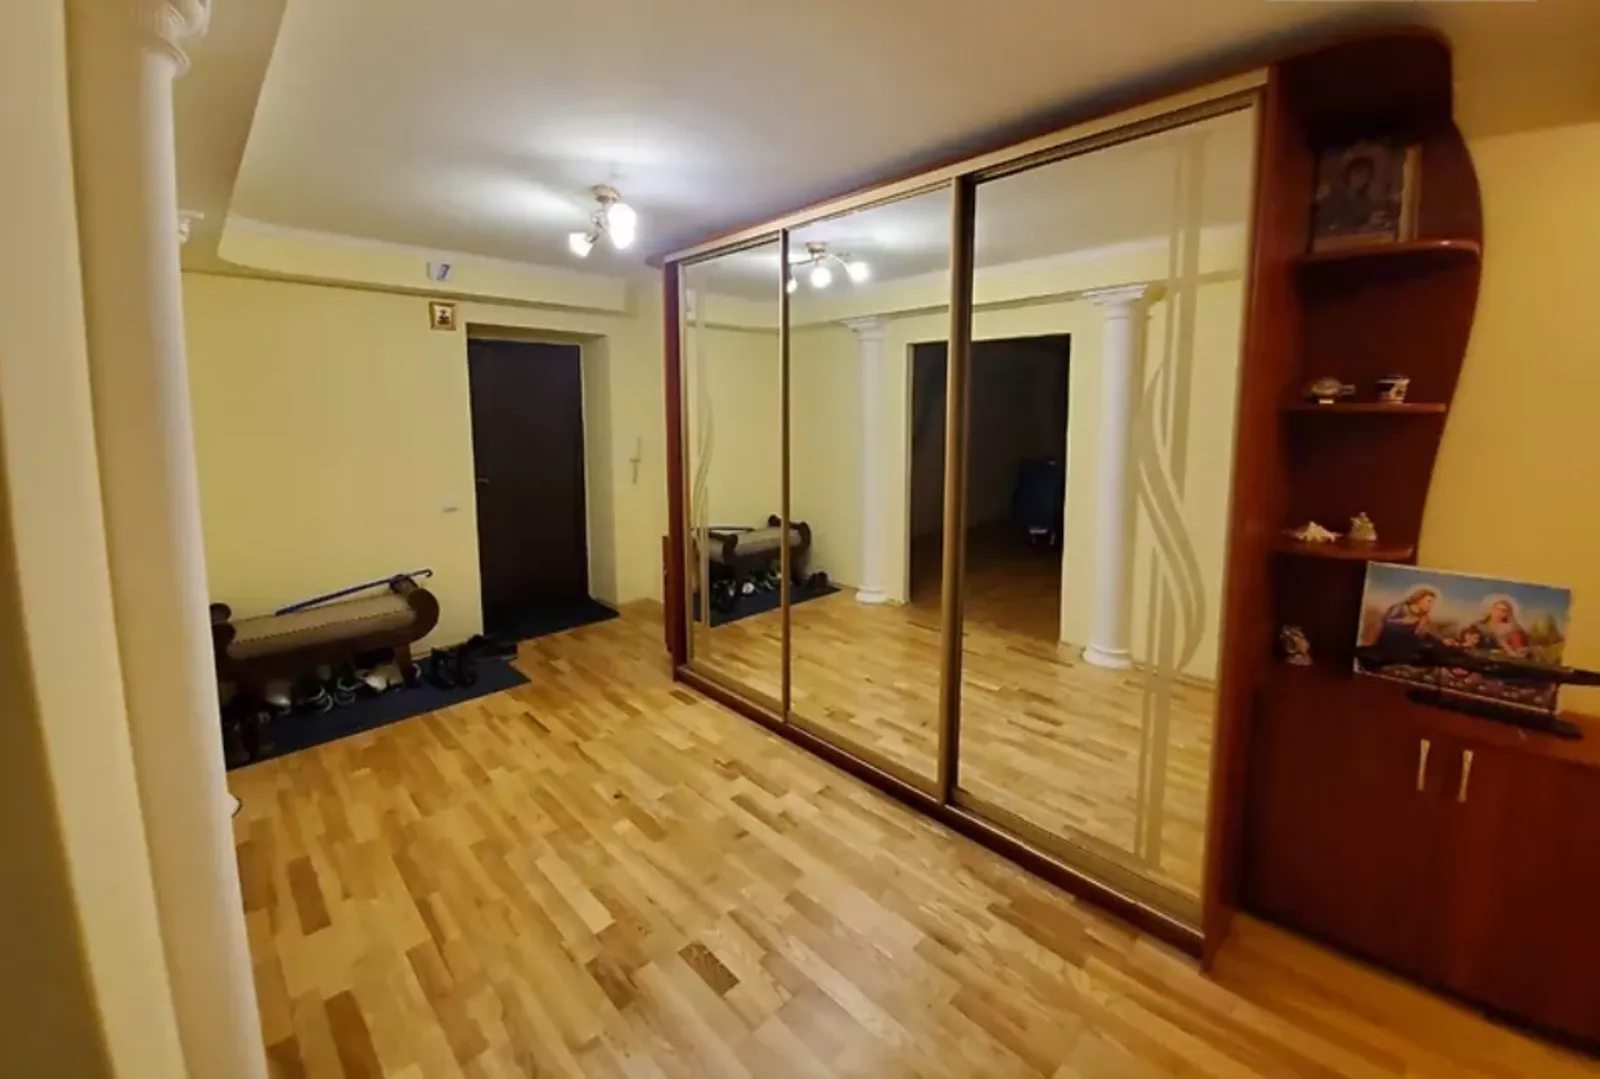 Apartment for rent. 3 rooms, 95 m², 7th floor/10 floors. Bam, Ternopil. 